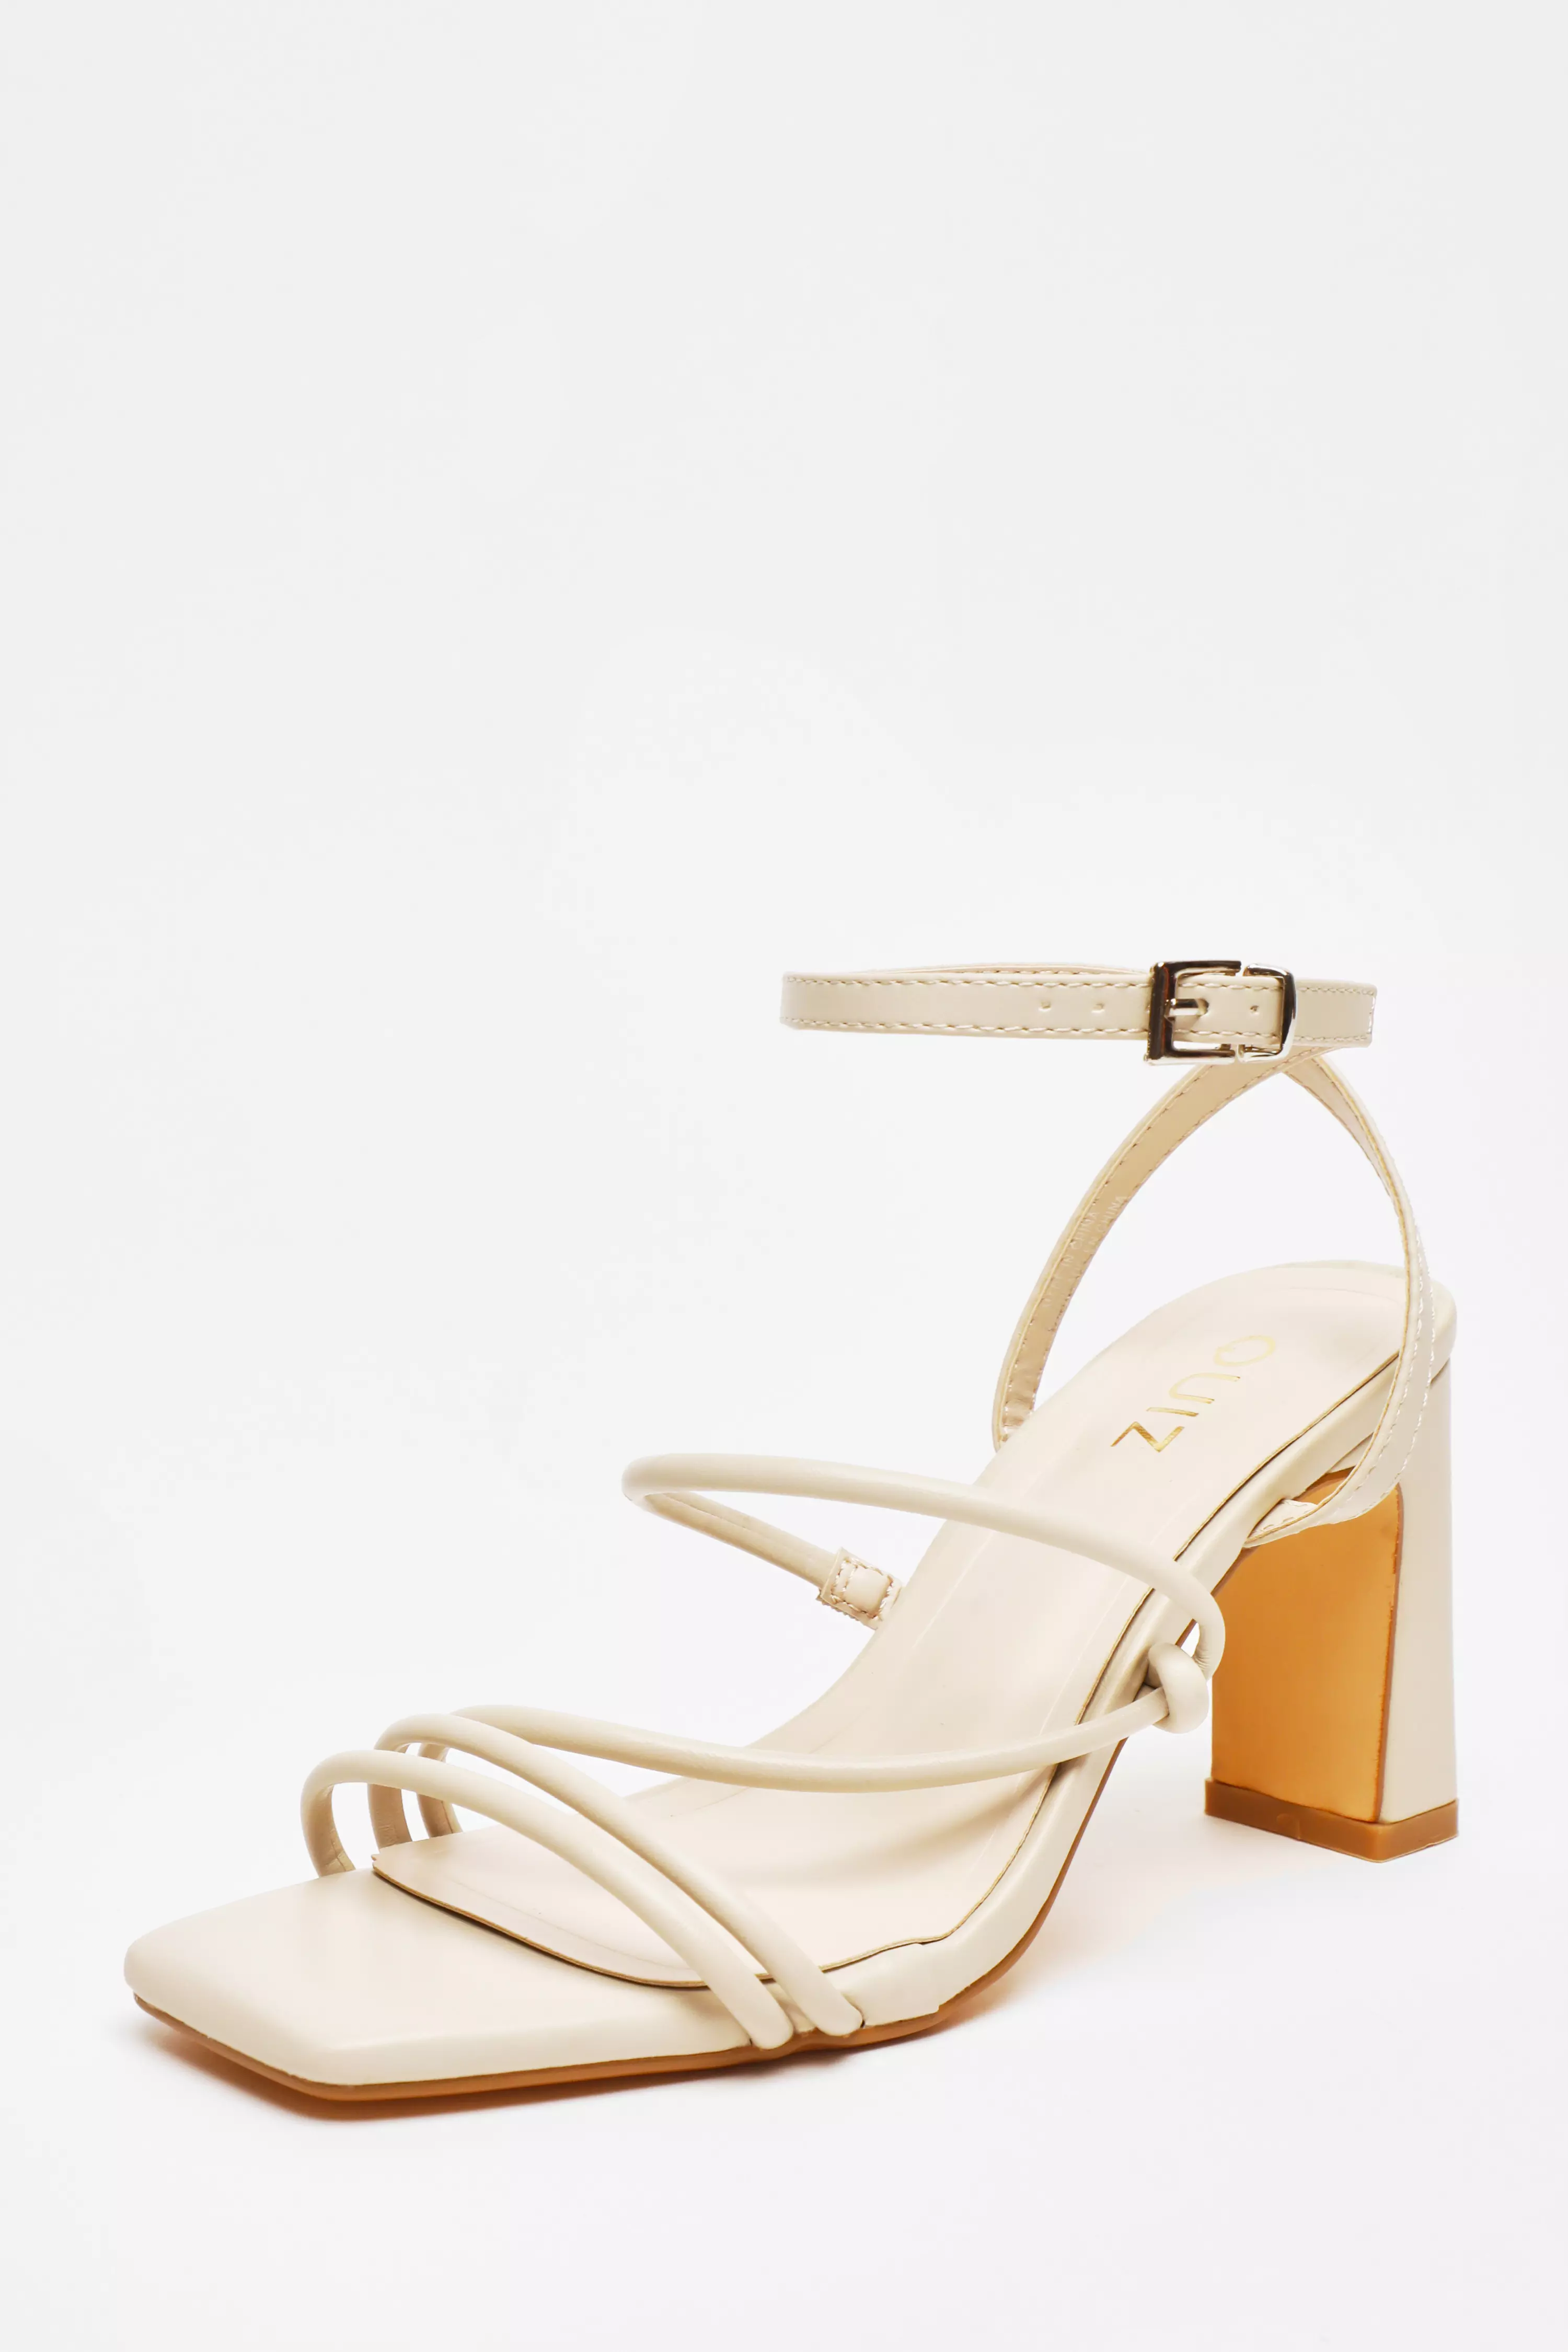 Nude Faux Leather Block Heeled Sandals - QUIZ Clothing